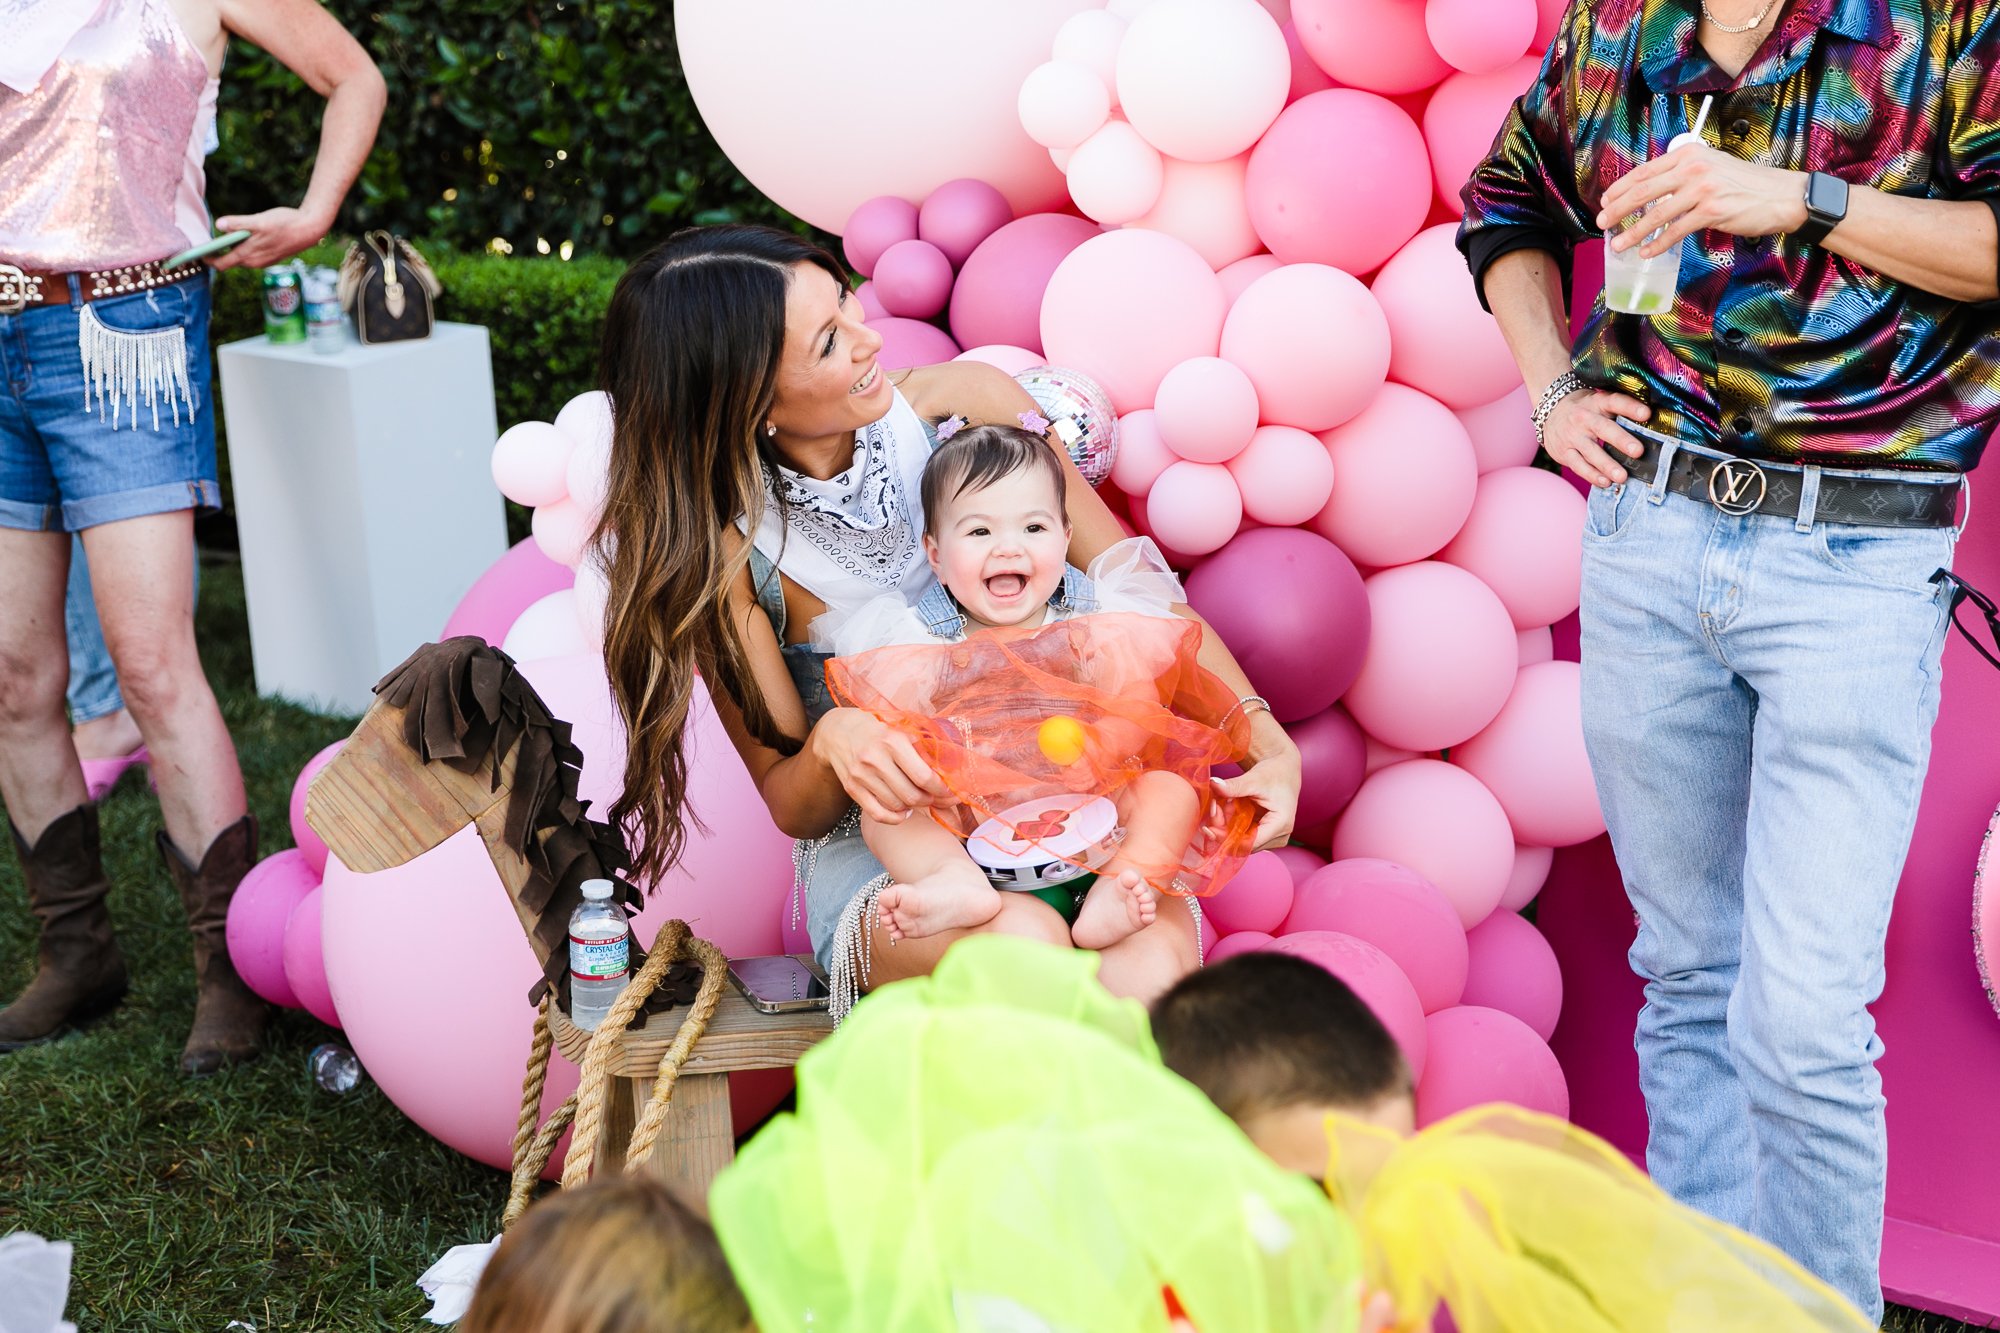 Los_Angeles_Party_Photographer_Luxury_Event_First_Birthday_Baby_Sherwood_Beverly_Hills_Cowboy_Disco_Theme_Girl_Child_Family_Photography-1244.jpg